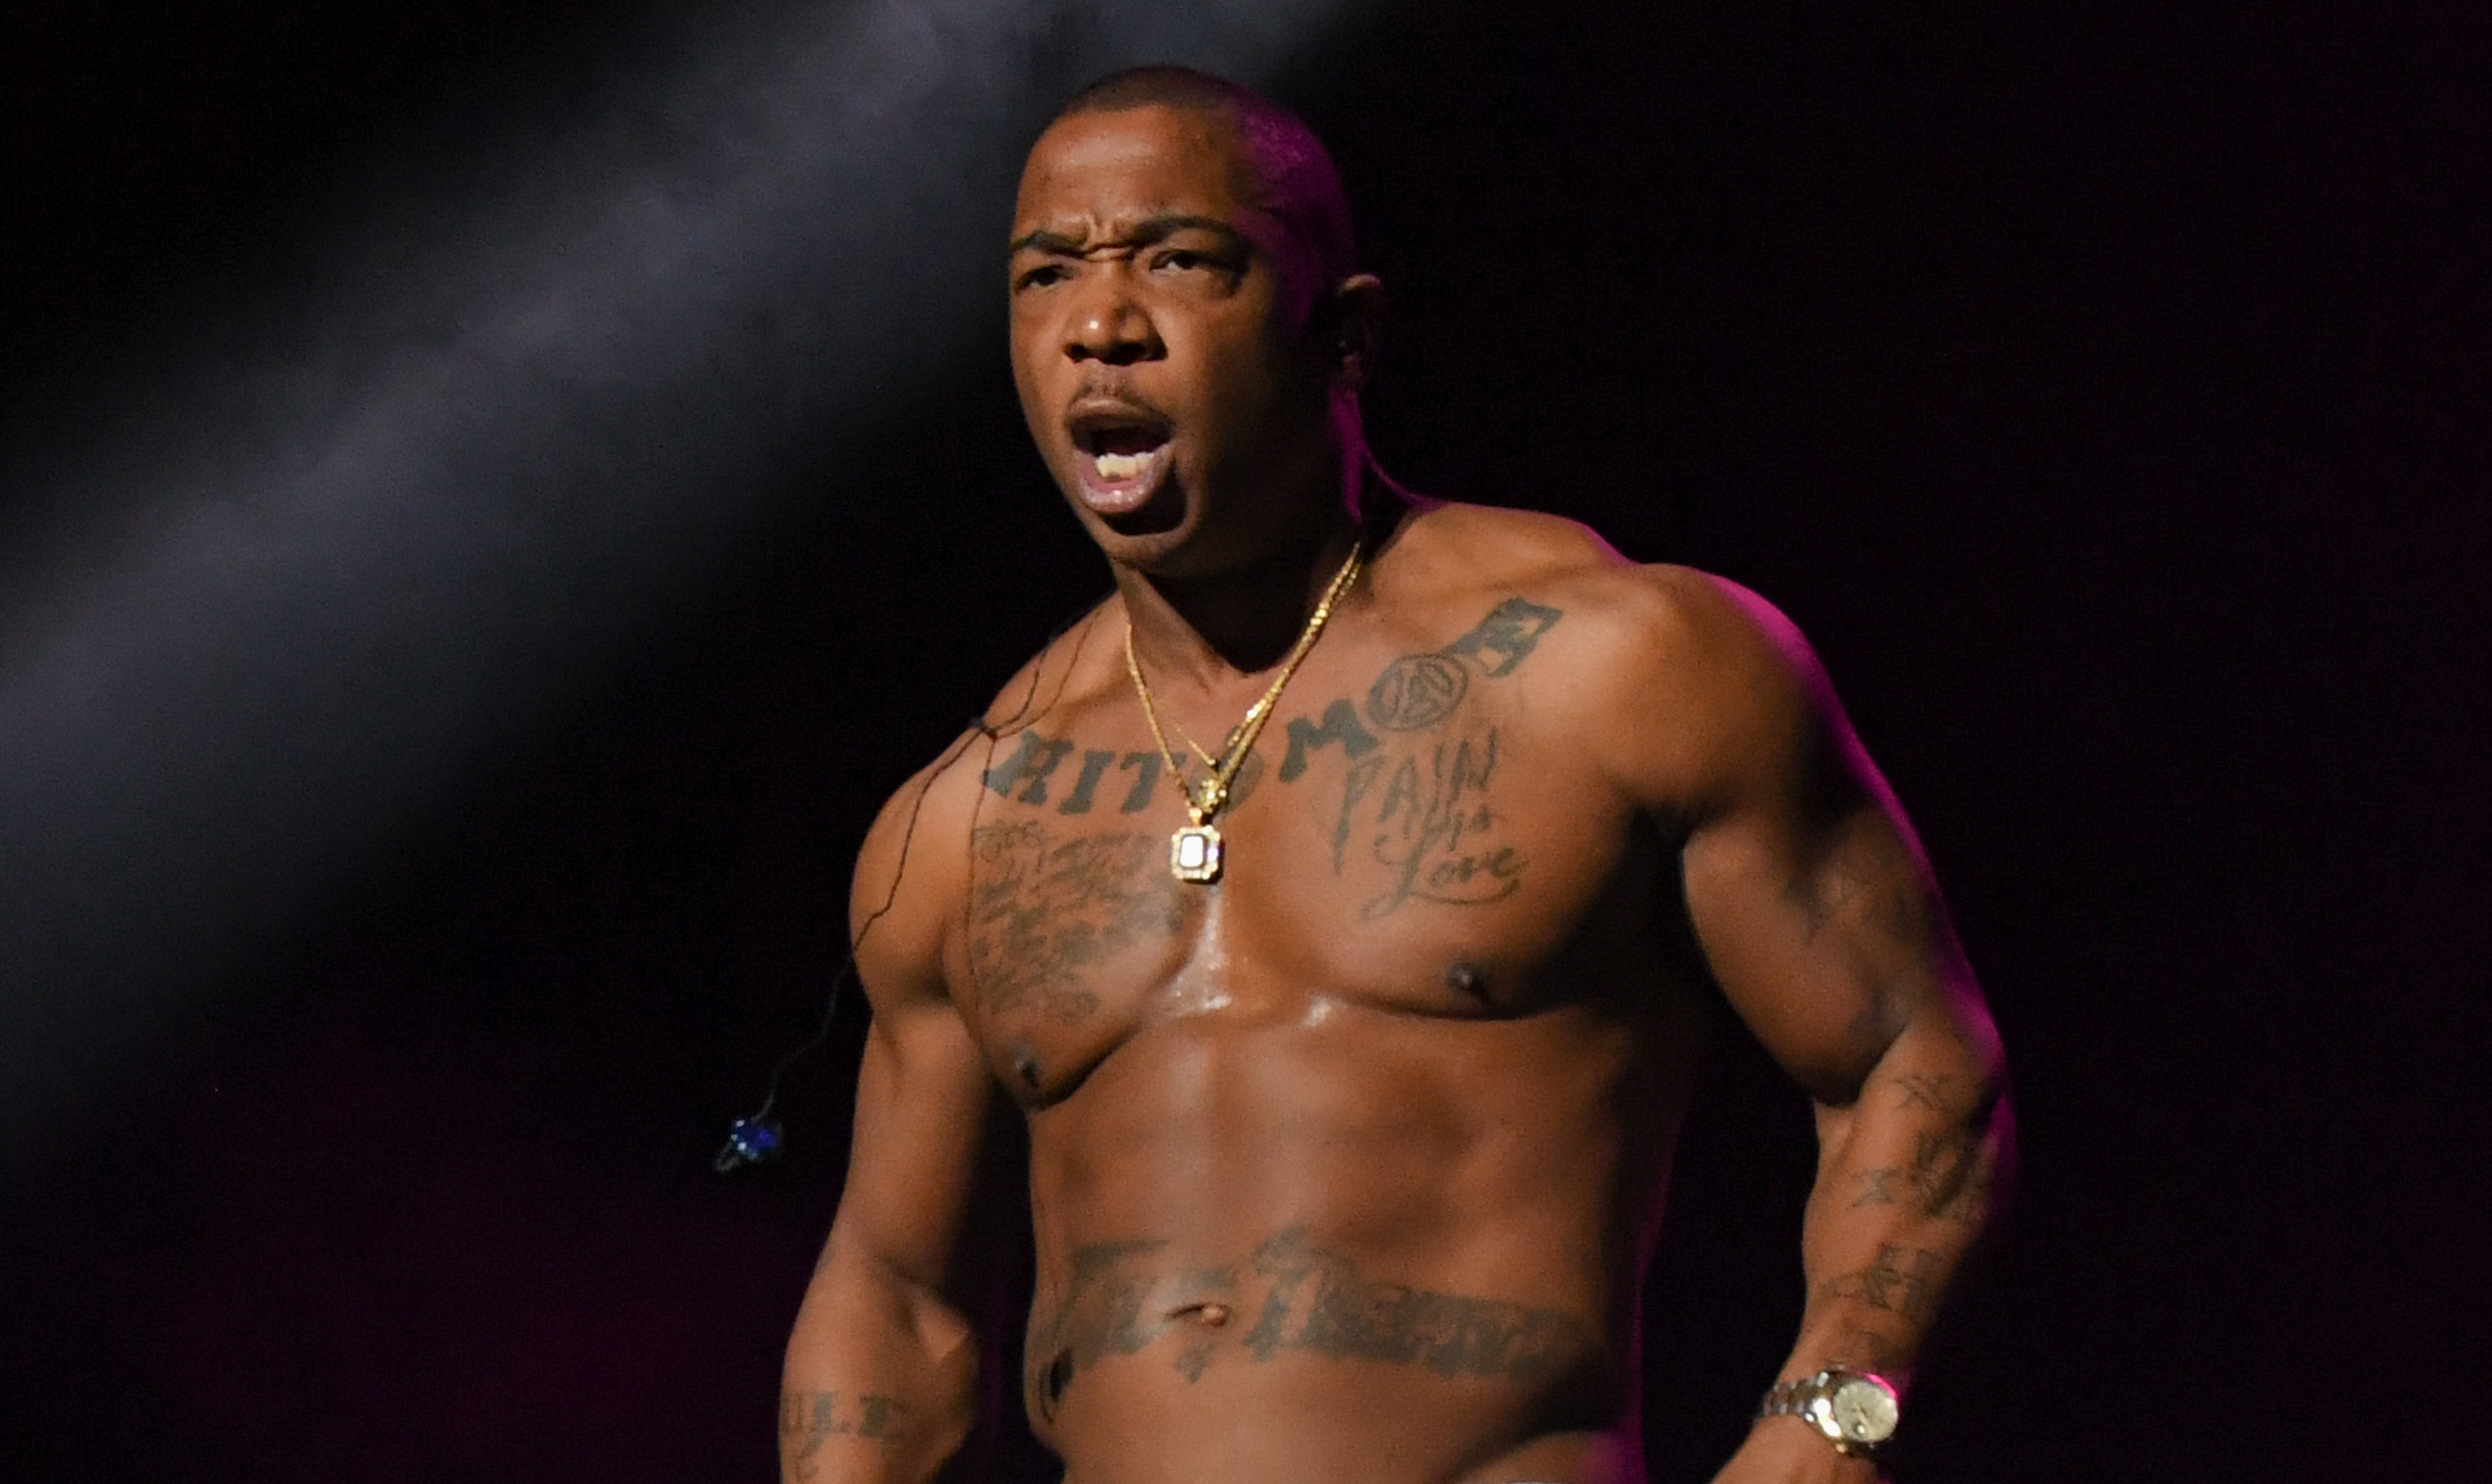 What Is the Net Worth of Ja Rule’s?